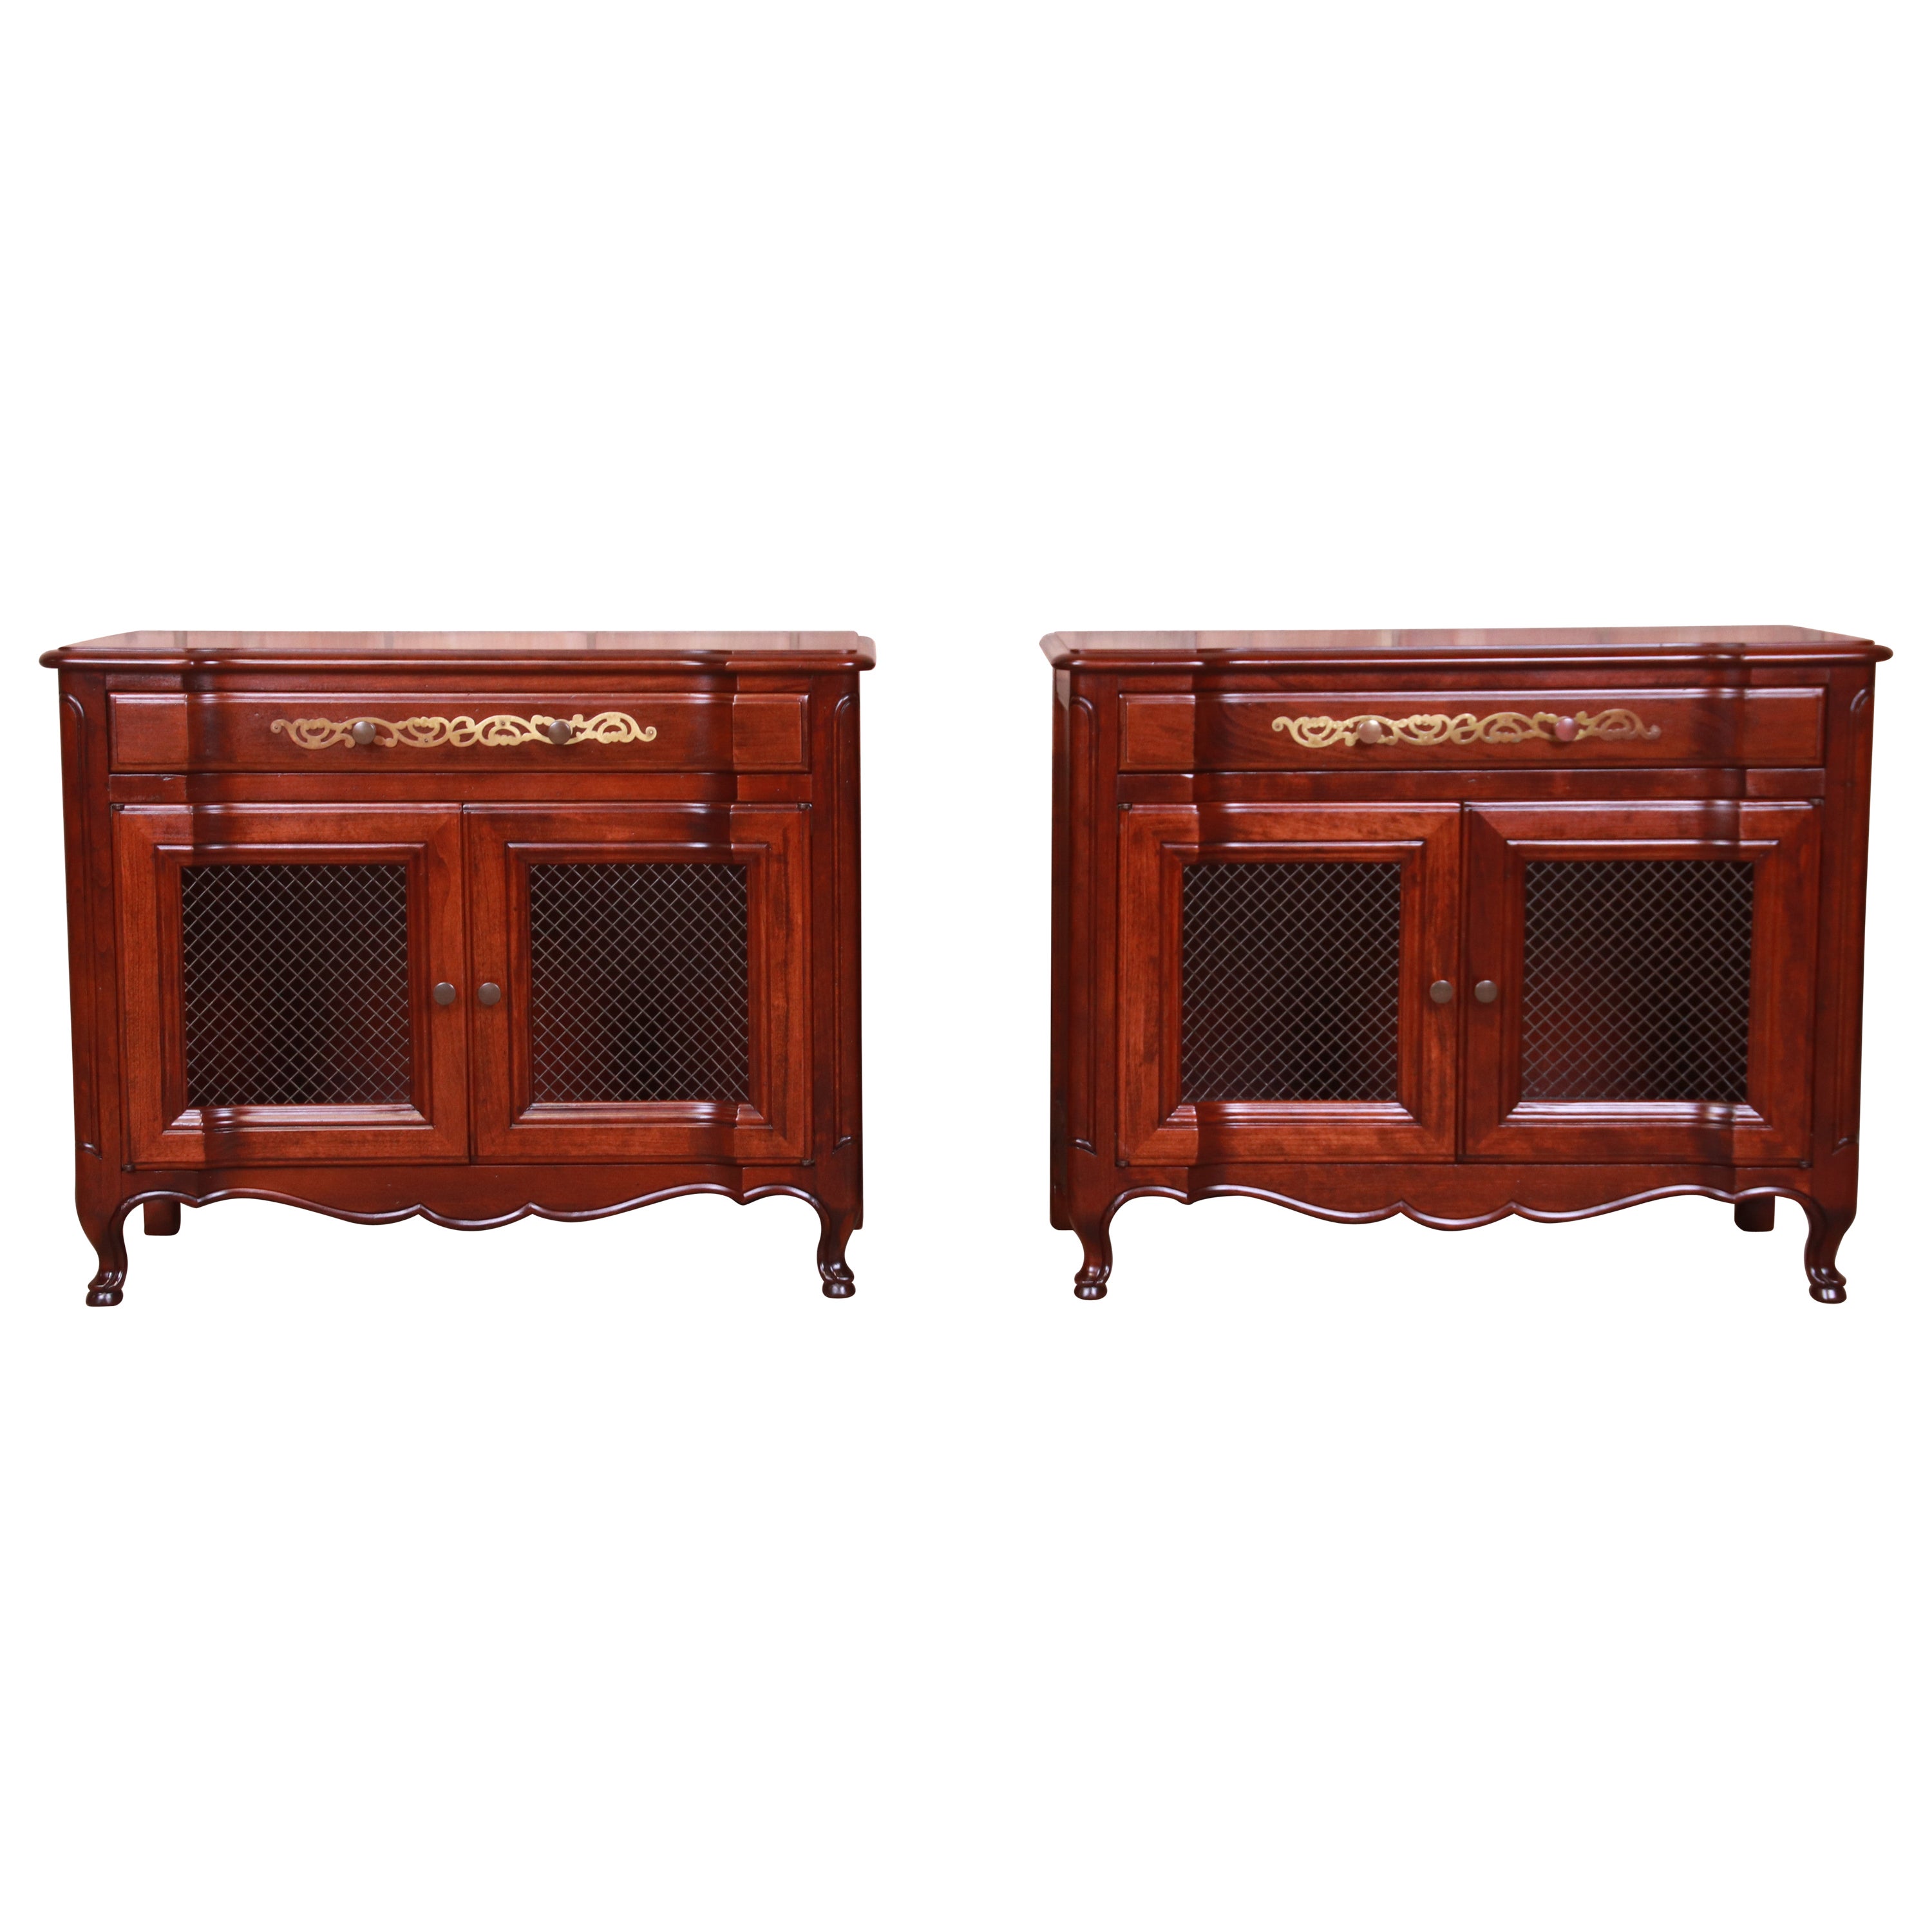 John Widdicomb French Provincial Louis XV Cherry Wood Nightstands, Refinished